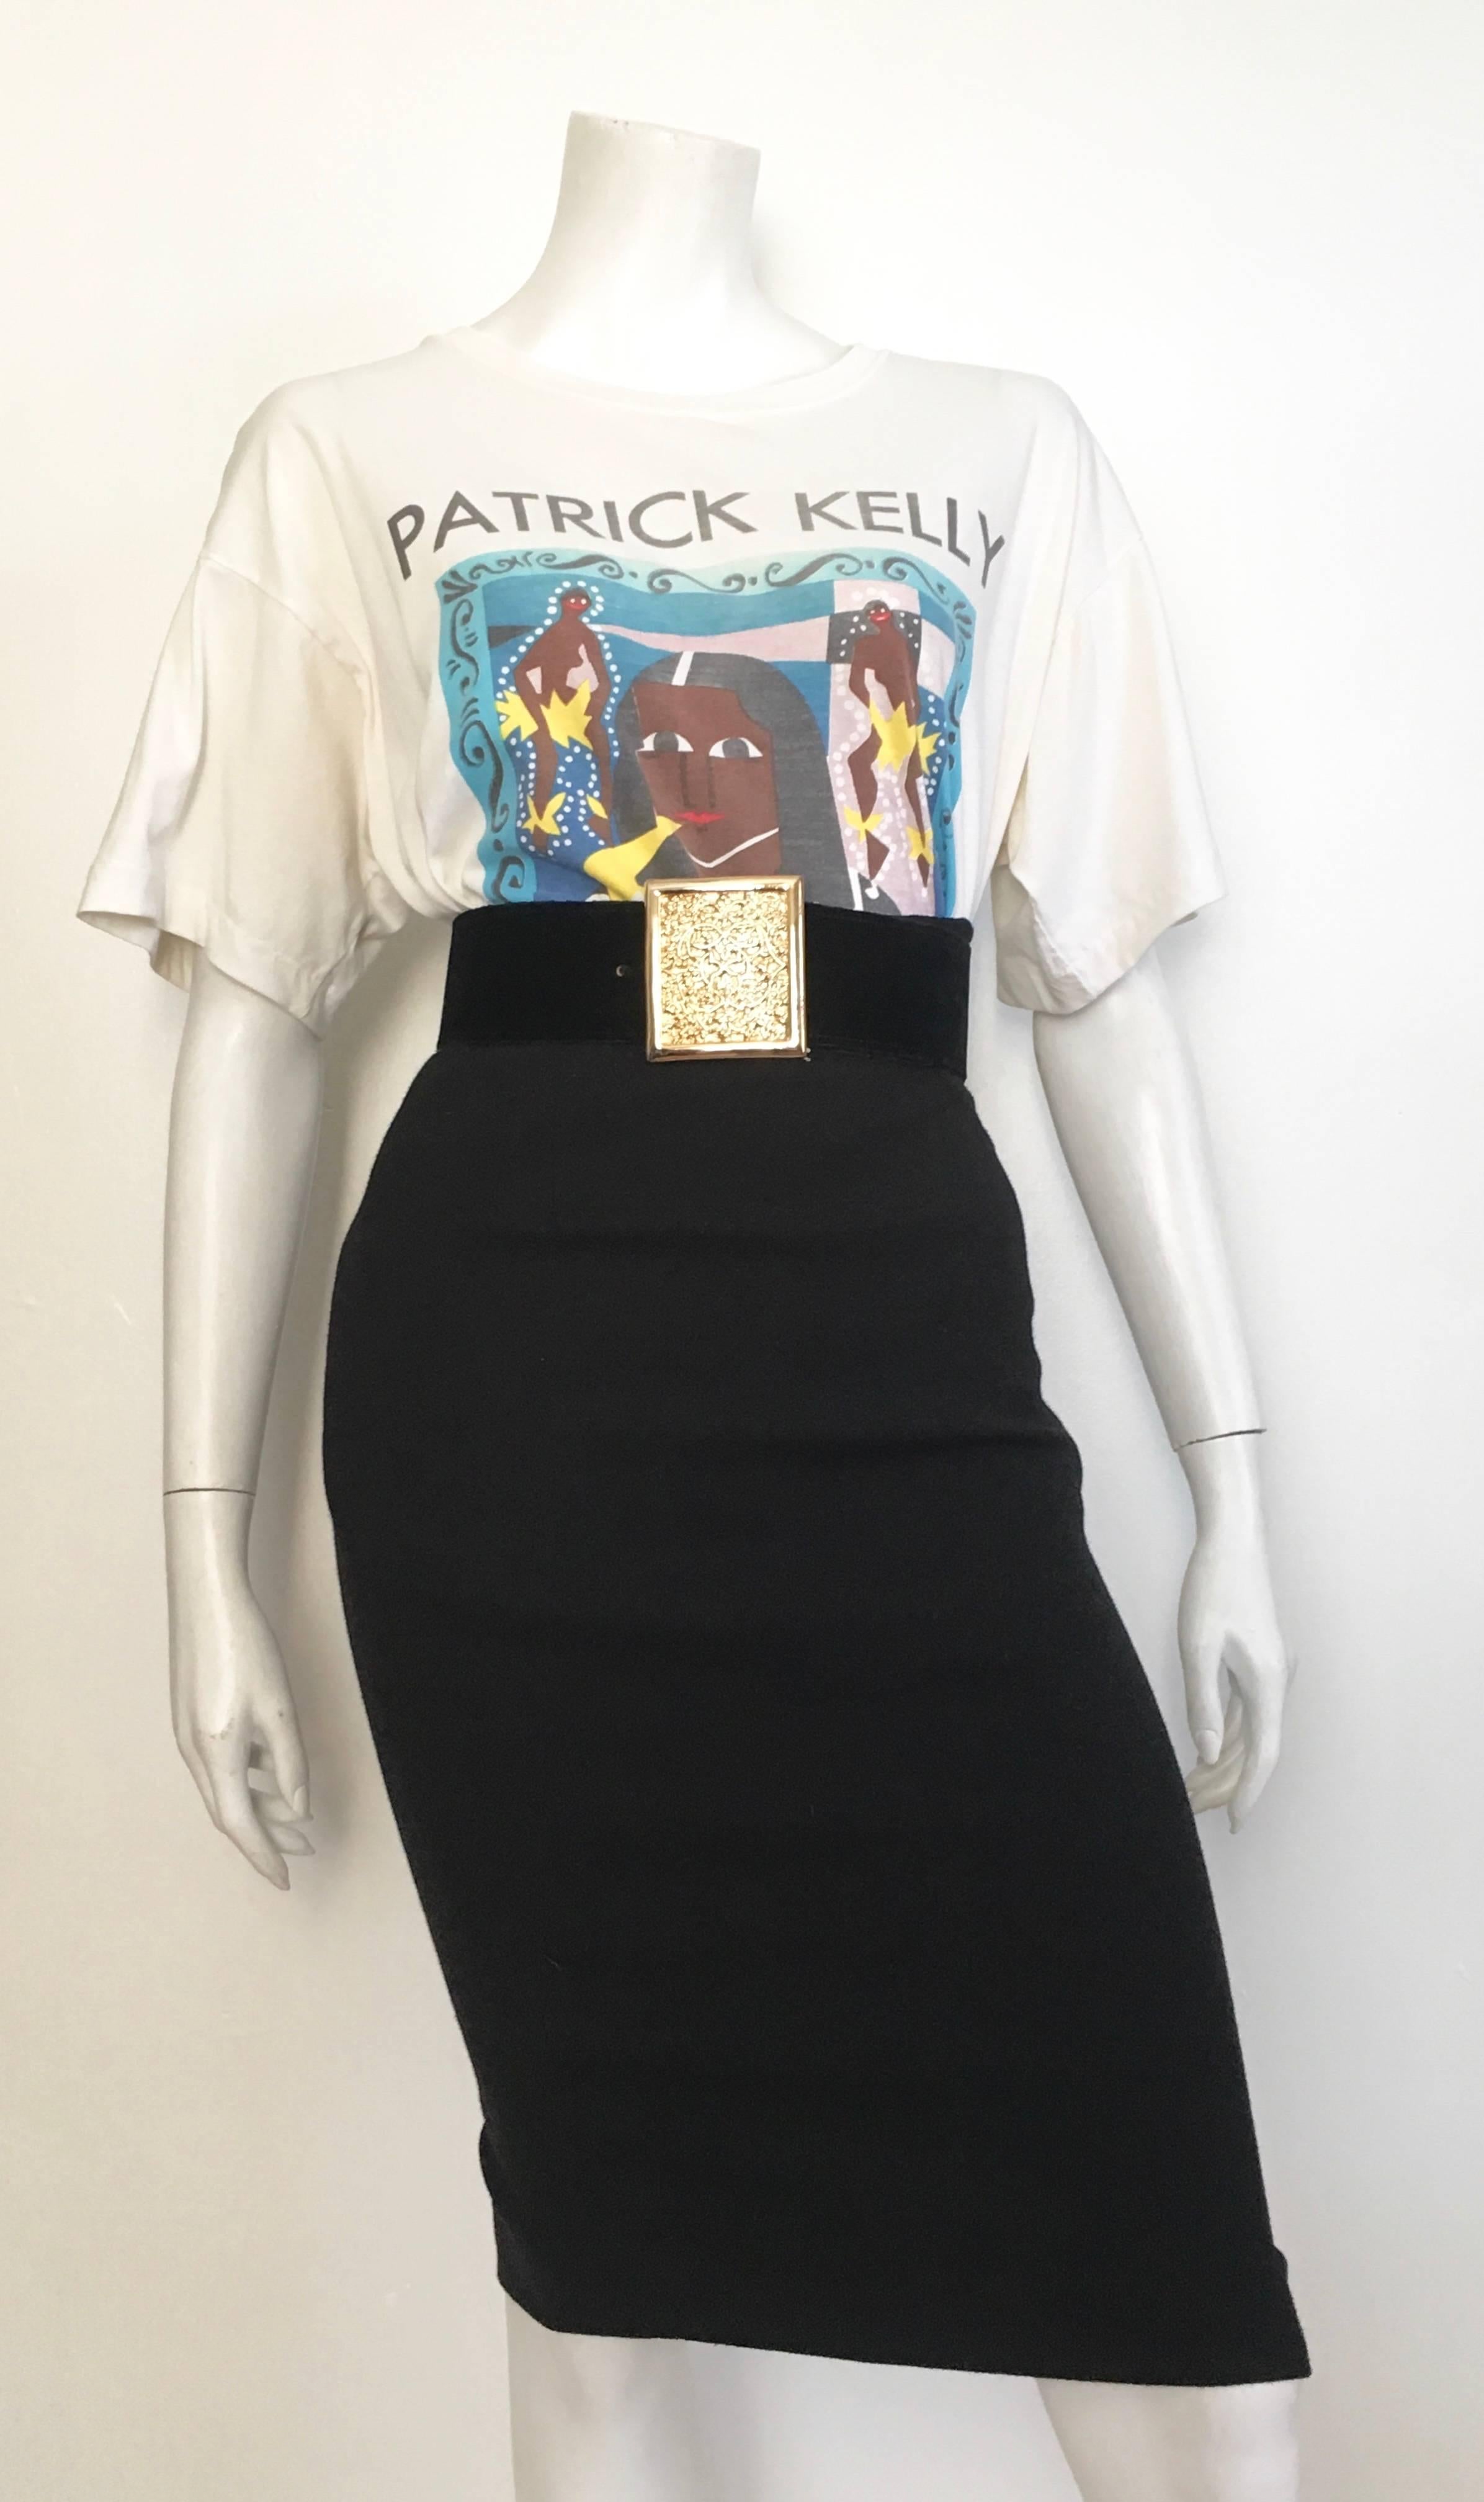 Ralph Lauren Collection Purple Label black wool pencil skirt is a size 2 but will fit a size 4 as well. The waist is 28" so that should fit a size 4 but you decide. Matilda the Mannequin is a size 4 and this fits her beautifully.  Ladies please